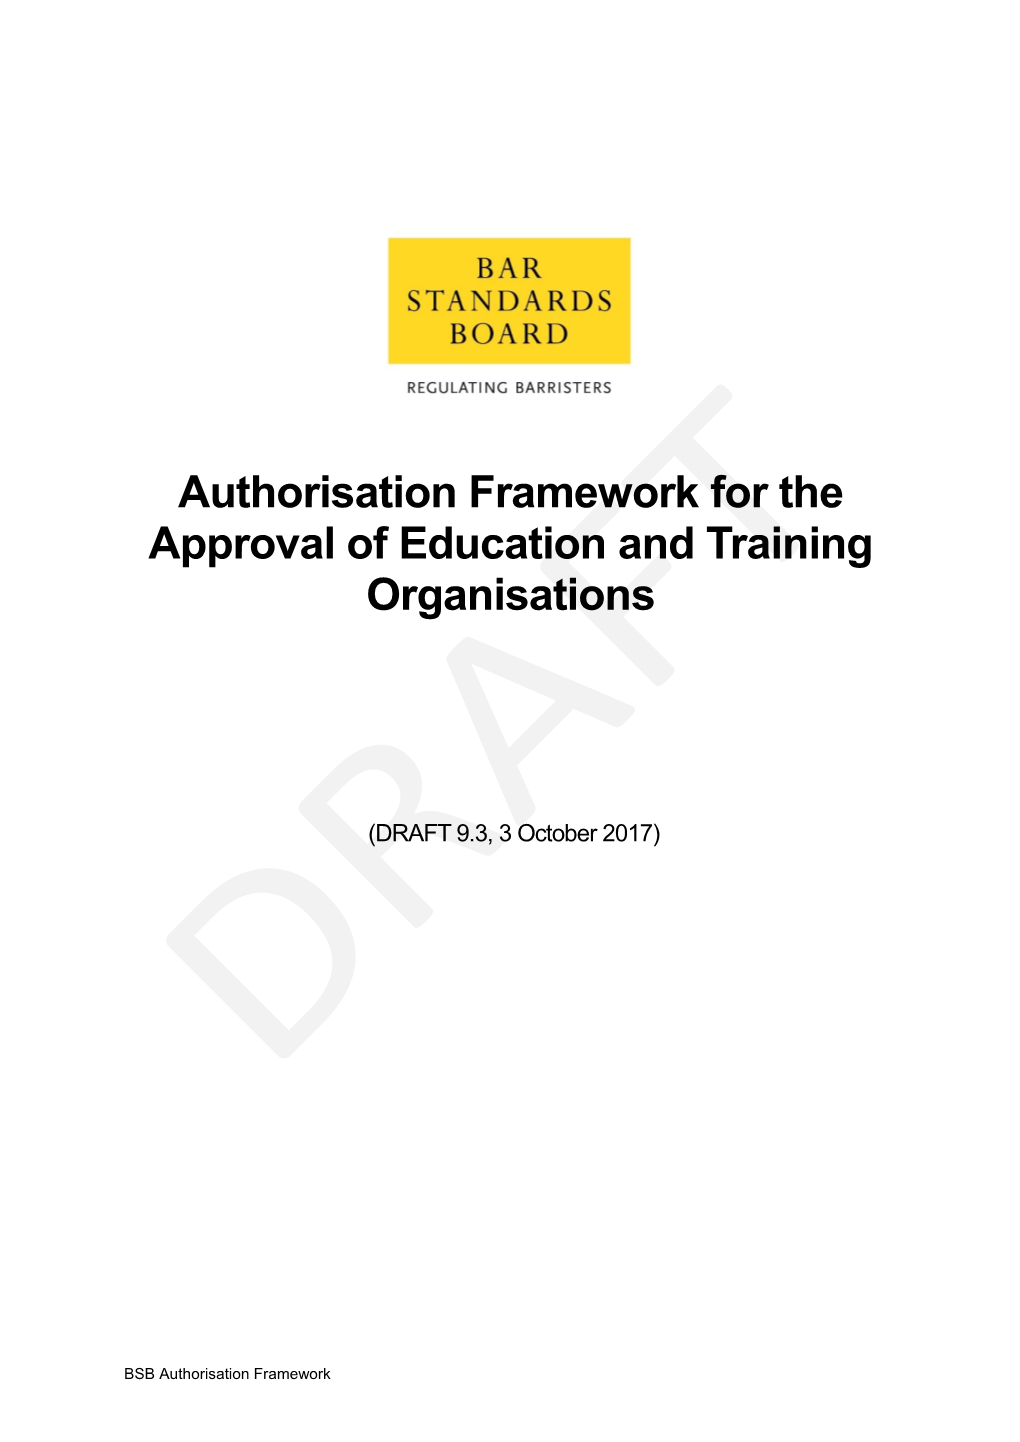 Draft Authorisation Framework for the Approval of Education and Training